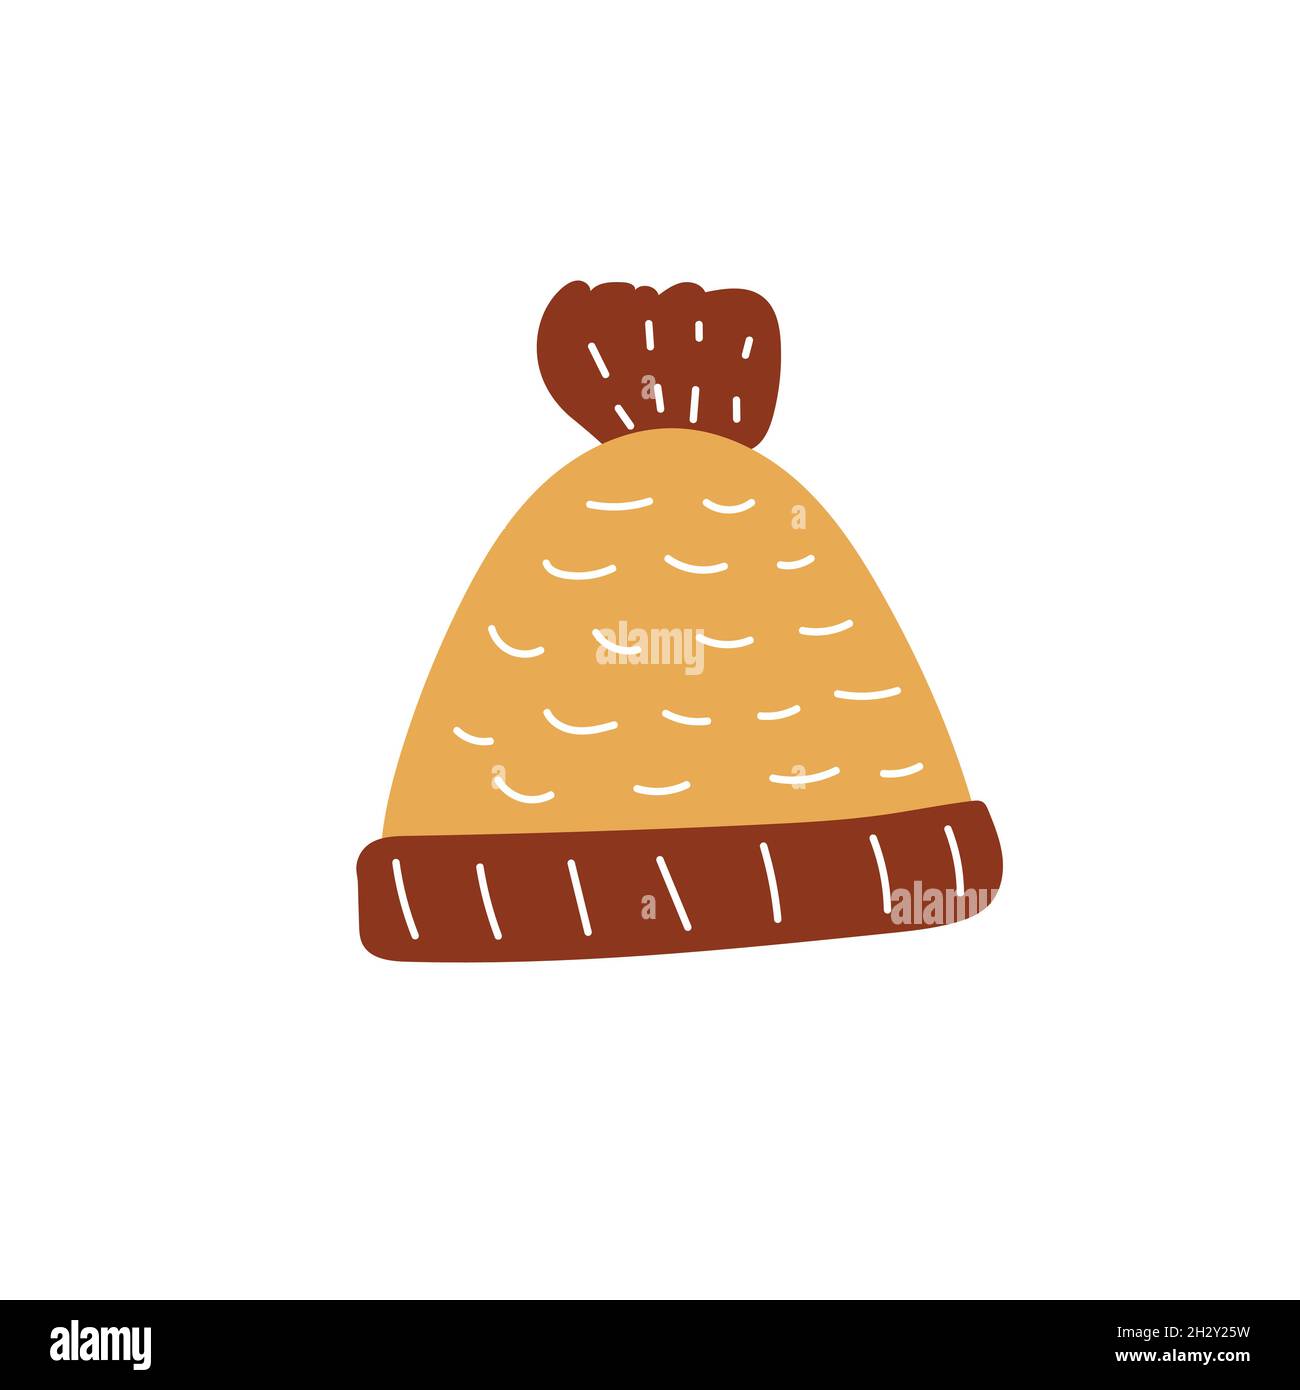 Knitted hat made of wool, vector illustration isolated on white background. Autumn hat icon Stock Vector